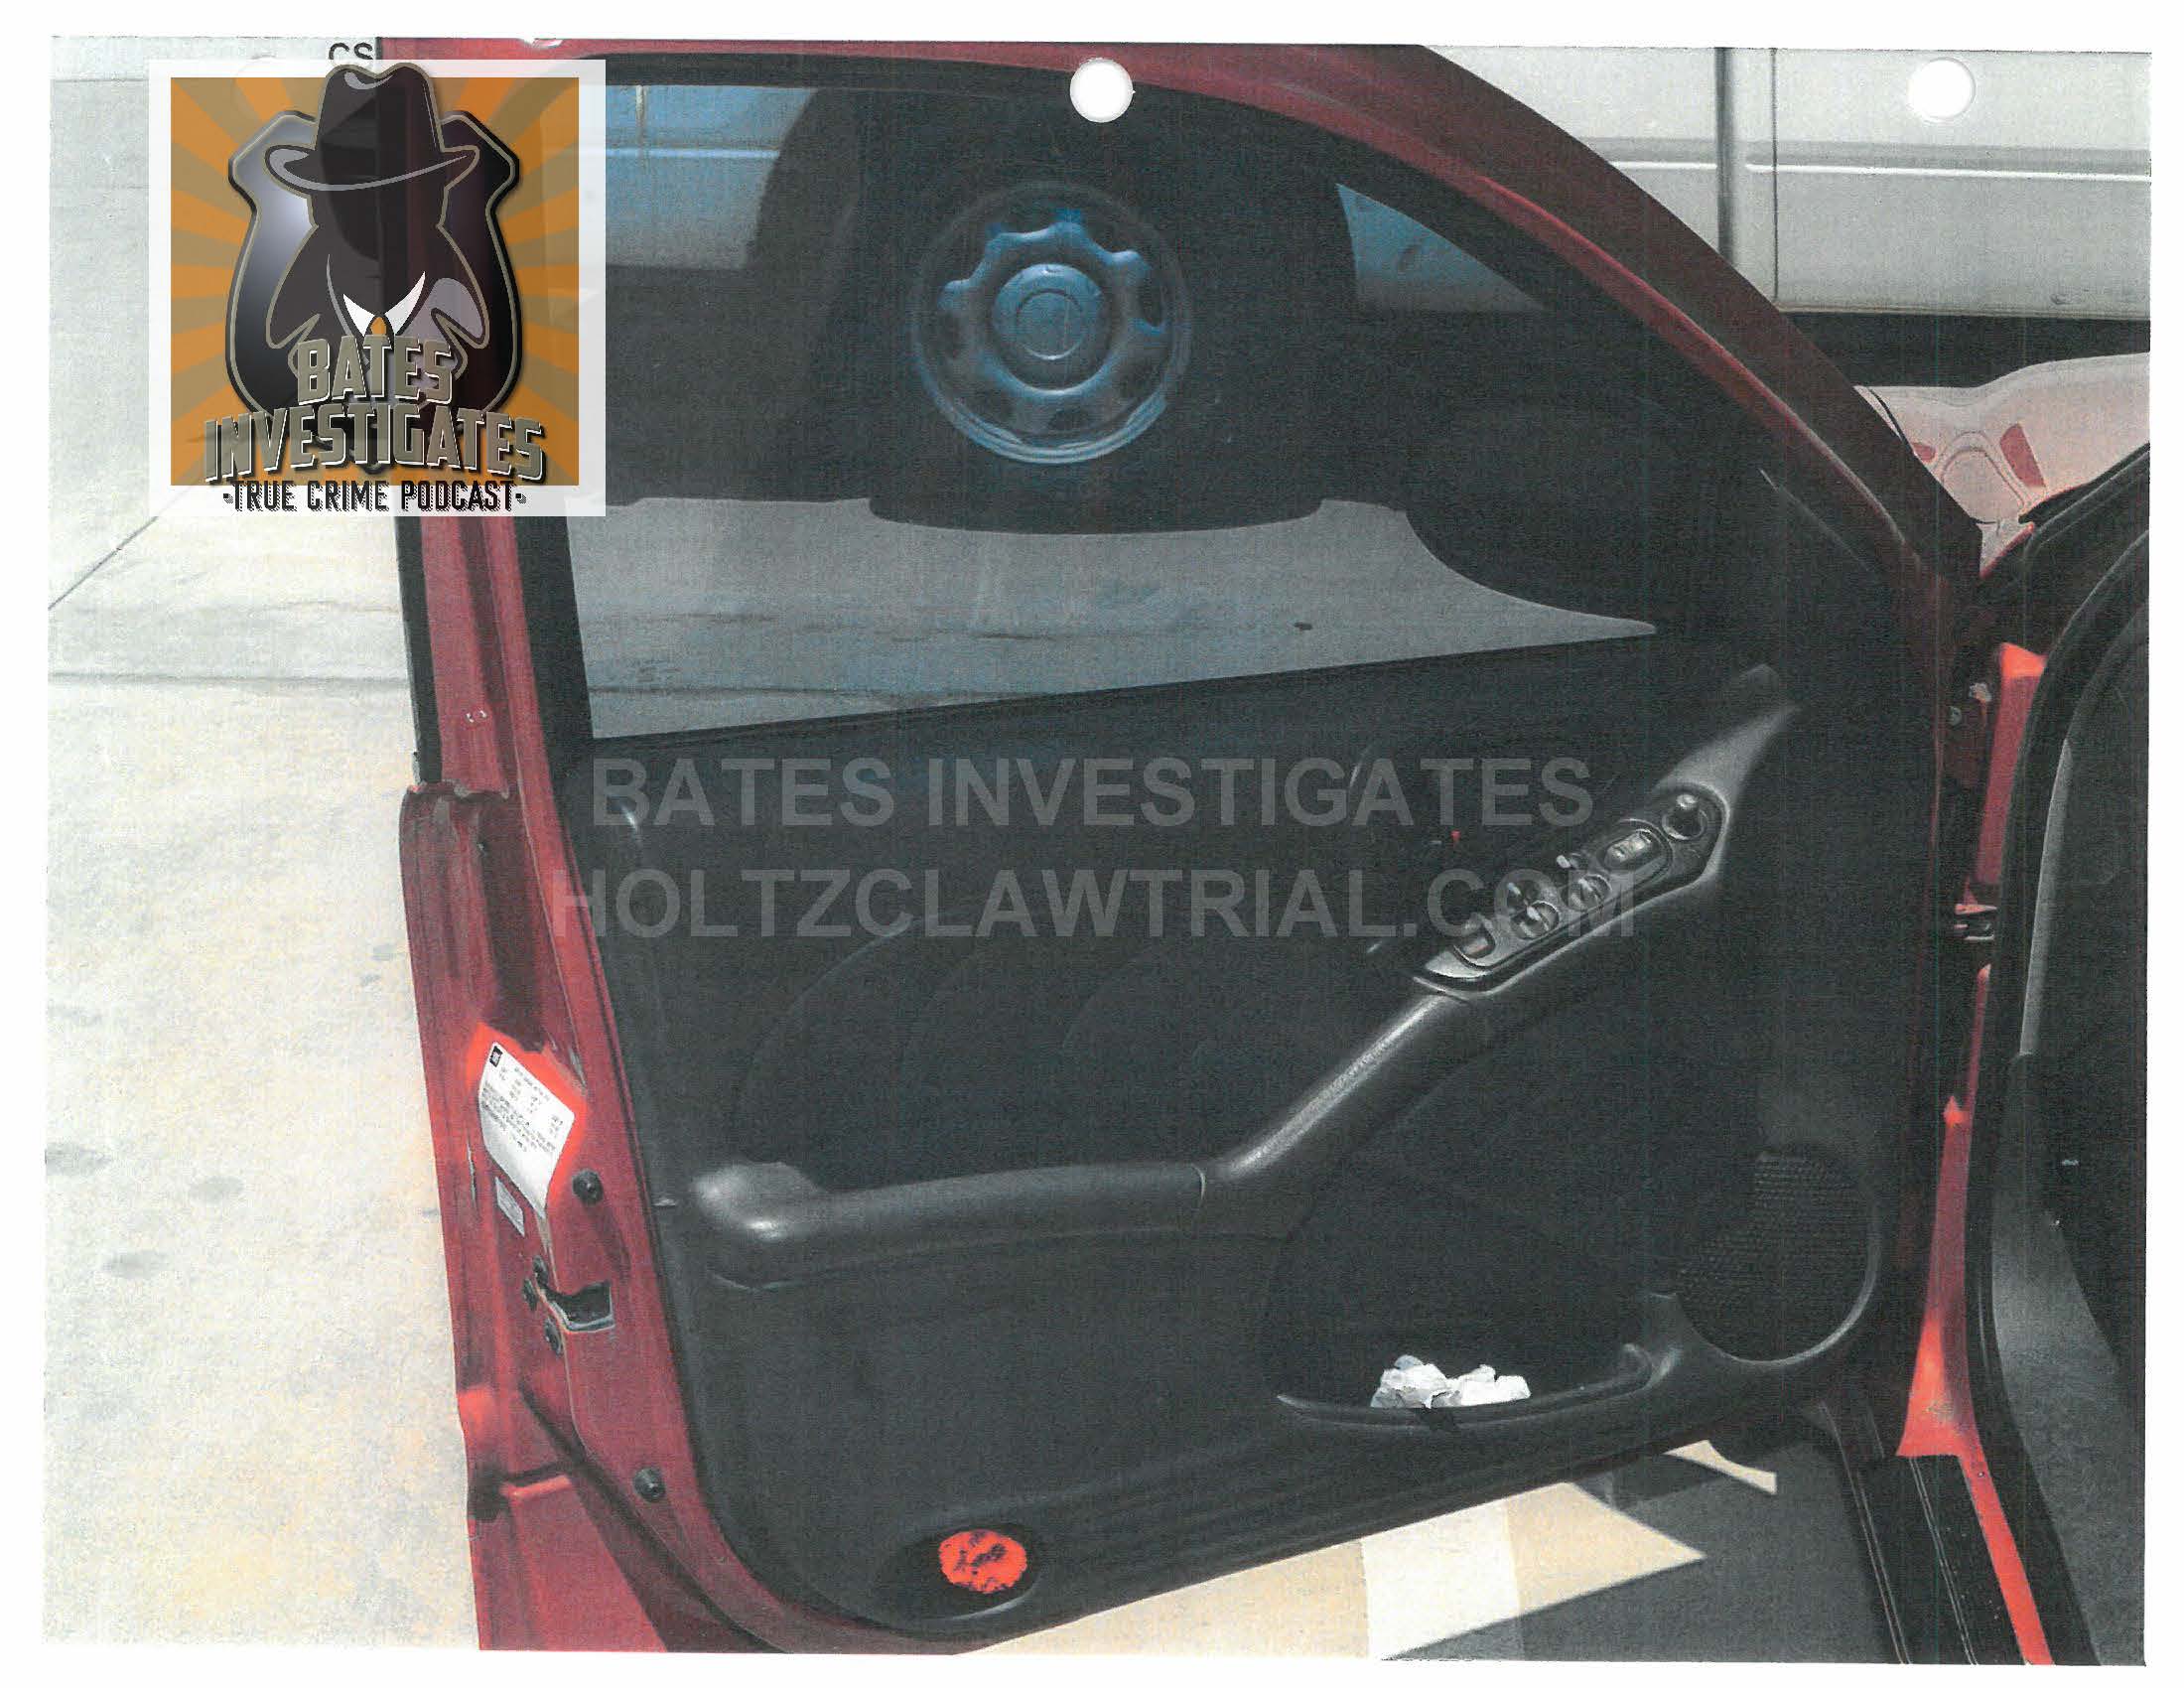 Holtzclaw Podcast Ep02 - Ligons Car - Watermarked_Page_08.jpg